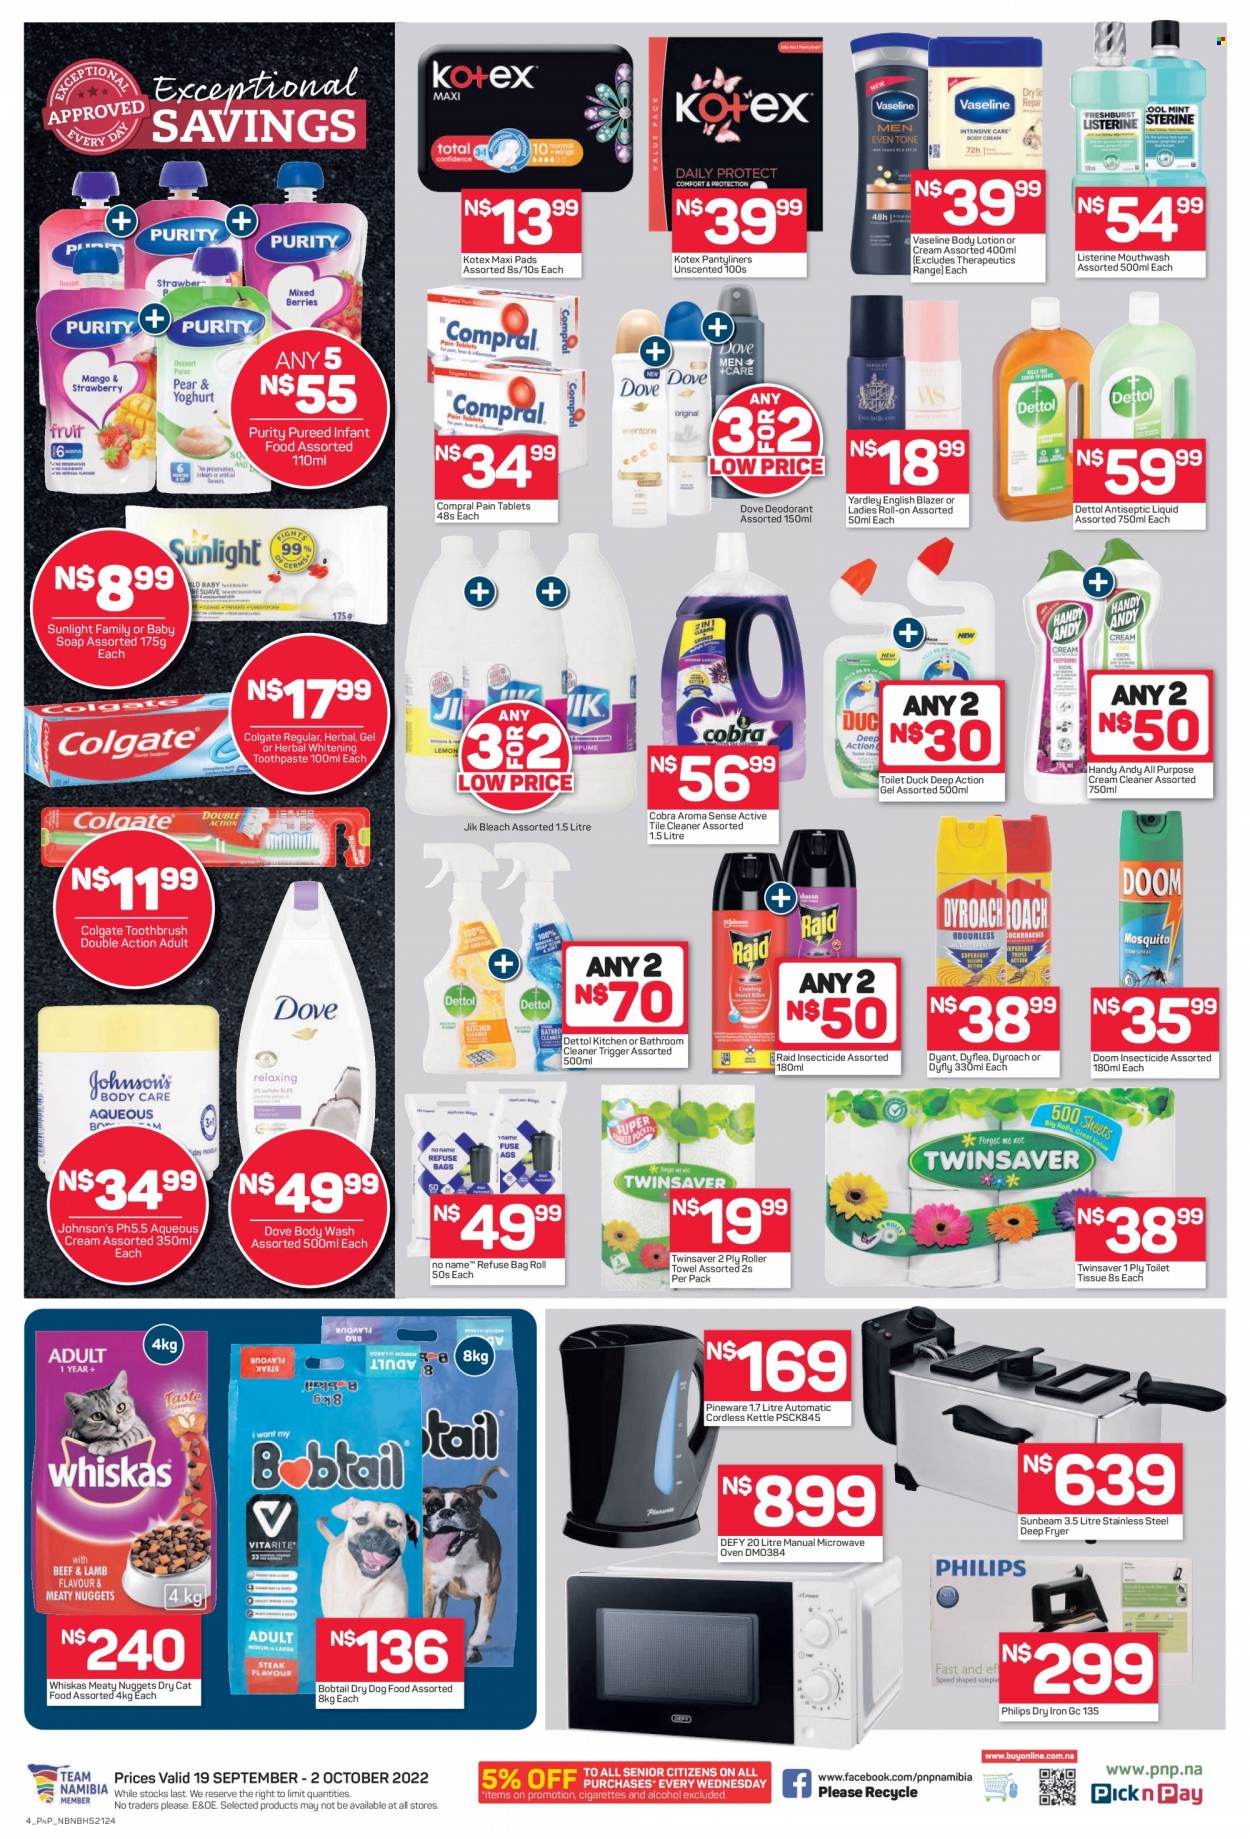 Pick n Pay catalogue  - 19/09/2022 - 02/10/2022 - Sales products - Dove, kettle, alcohol, Purity, Johnson's, Dettol, cream cleaner, bleach, cleaner, Sunlight, body wash, Vaseline, soap, Colgate, Listerine, toothbrush, toothpaste, mouthwash, sanitary pads, Kotex, pantyliners, body lotion, insecticide, Raid, Philips, animal food, cat food, dog food, Whiskas, dry dog food, dry cat food. Page 2.